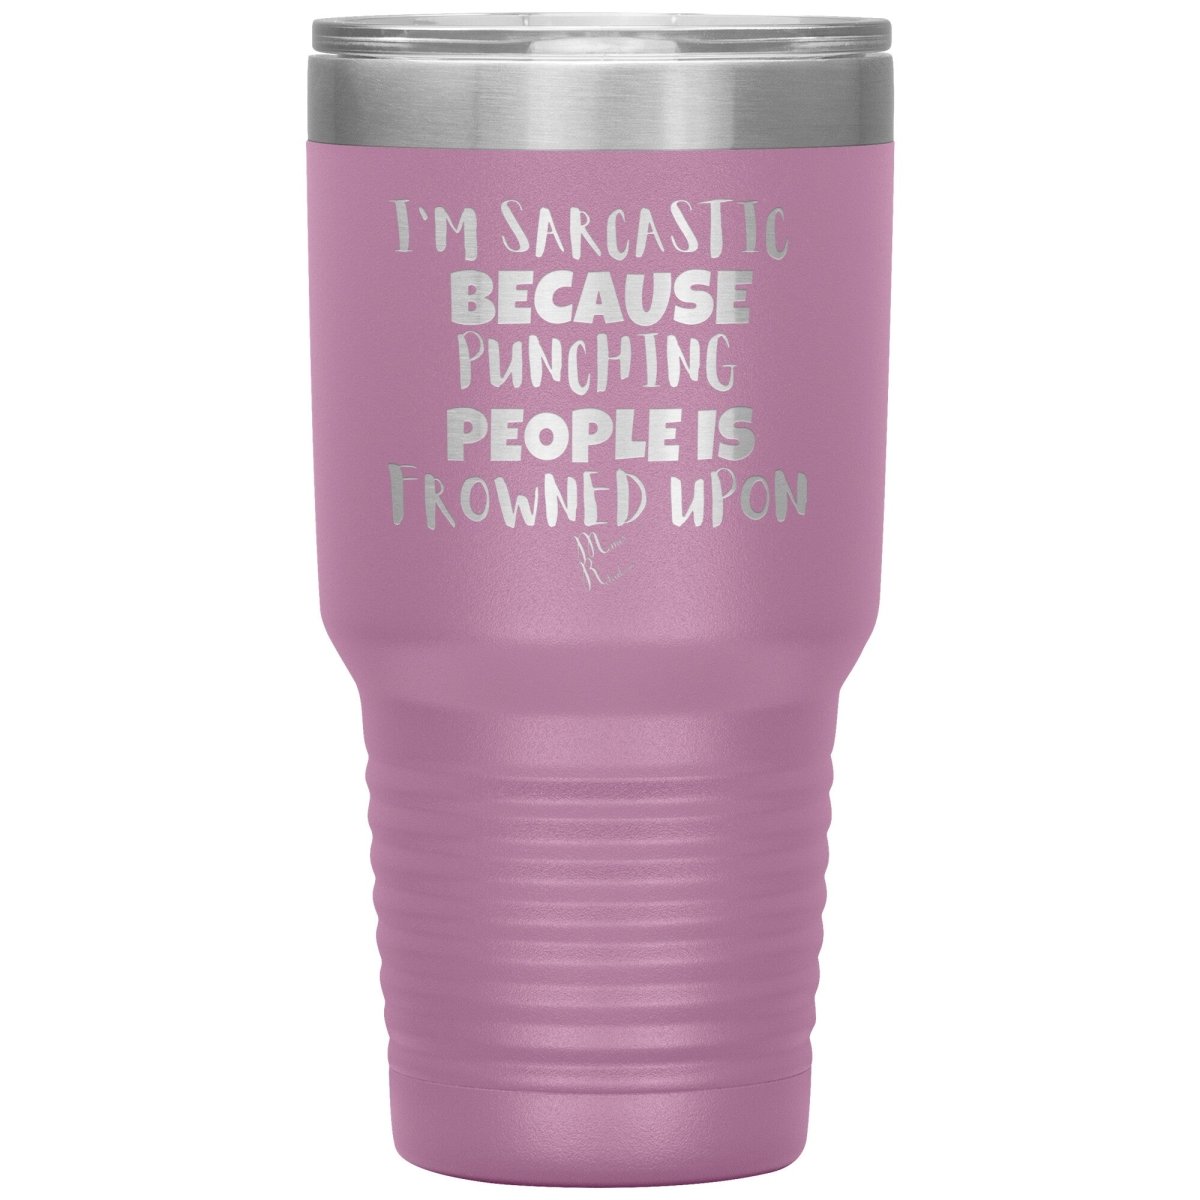 I'm Sarcastic Because Punching People is Frowned Upon Tumblers, 30oz Insulated Tumbler / Light Purple - MemesRetail.com